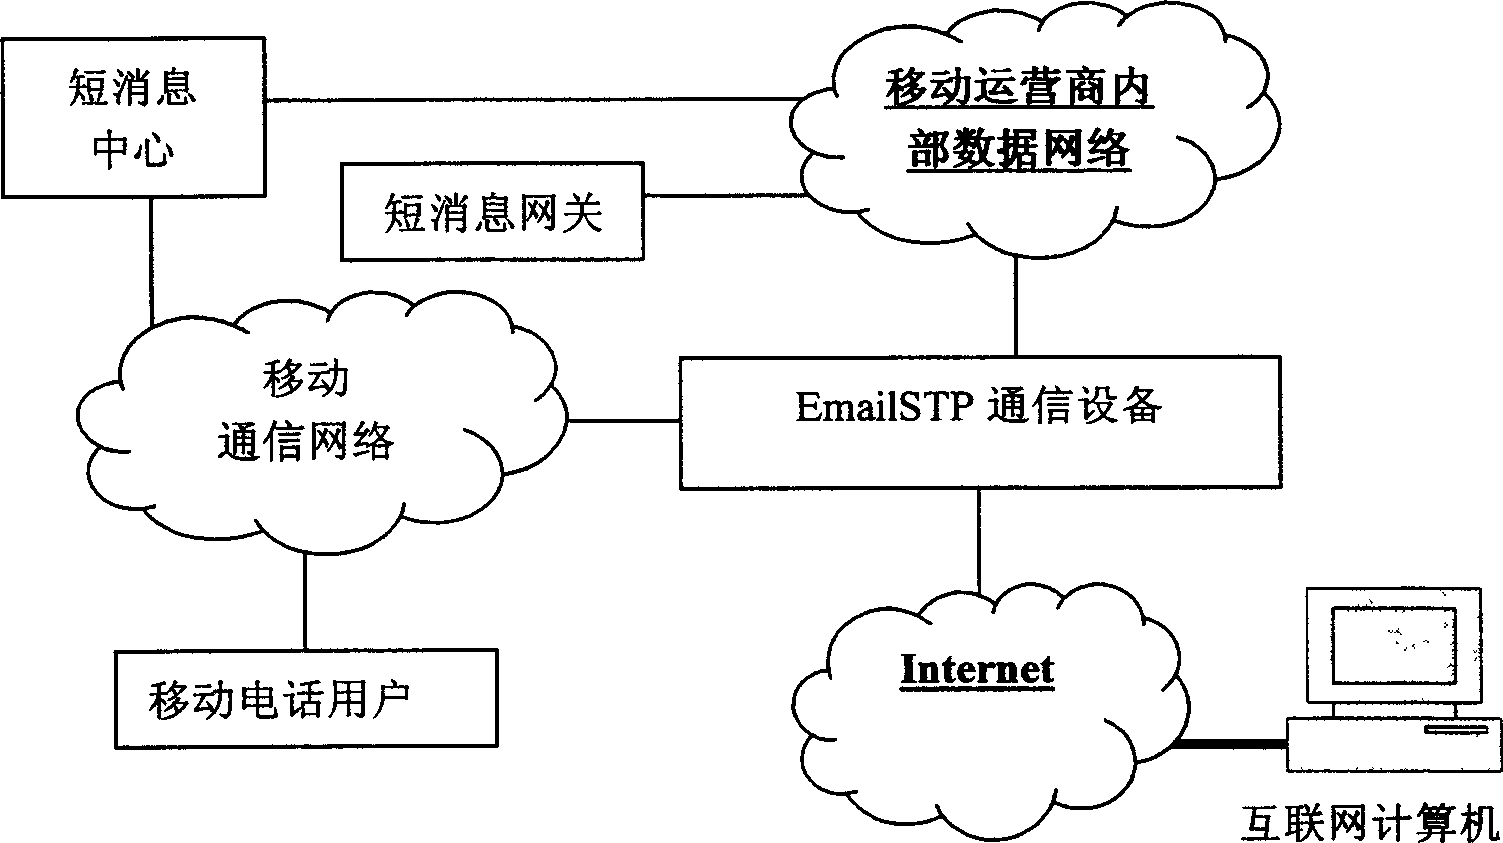 Apparatus and method for providing virtual electronic mail box service based on mobile telephone number